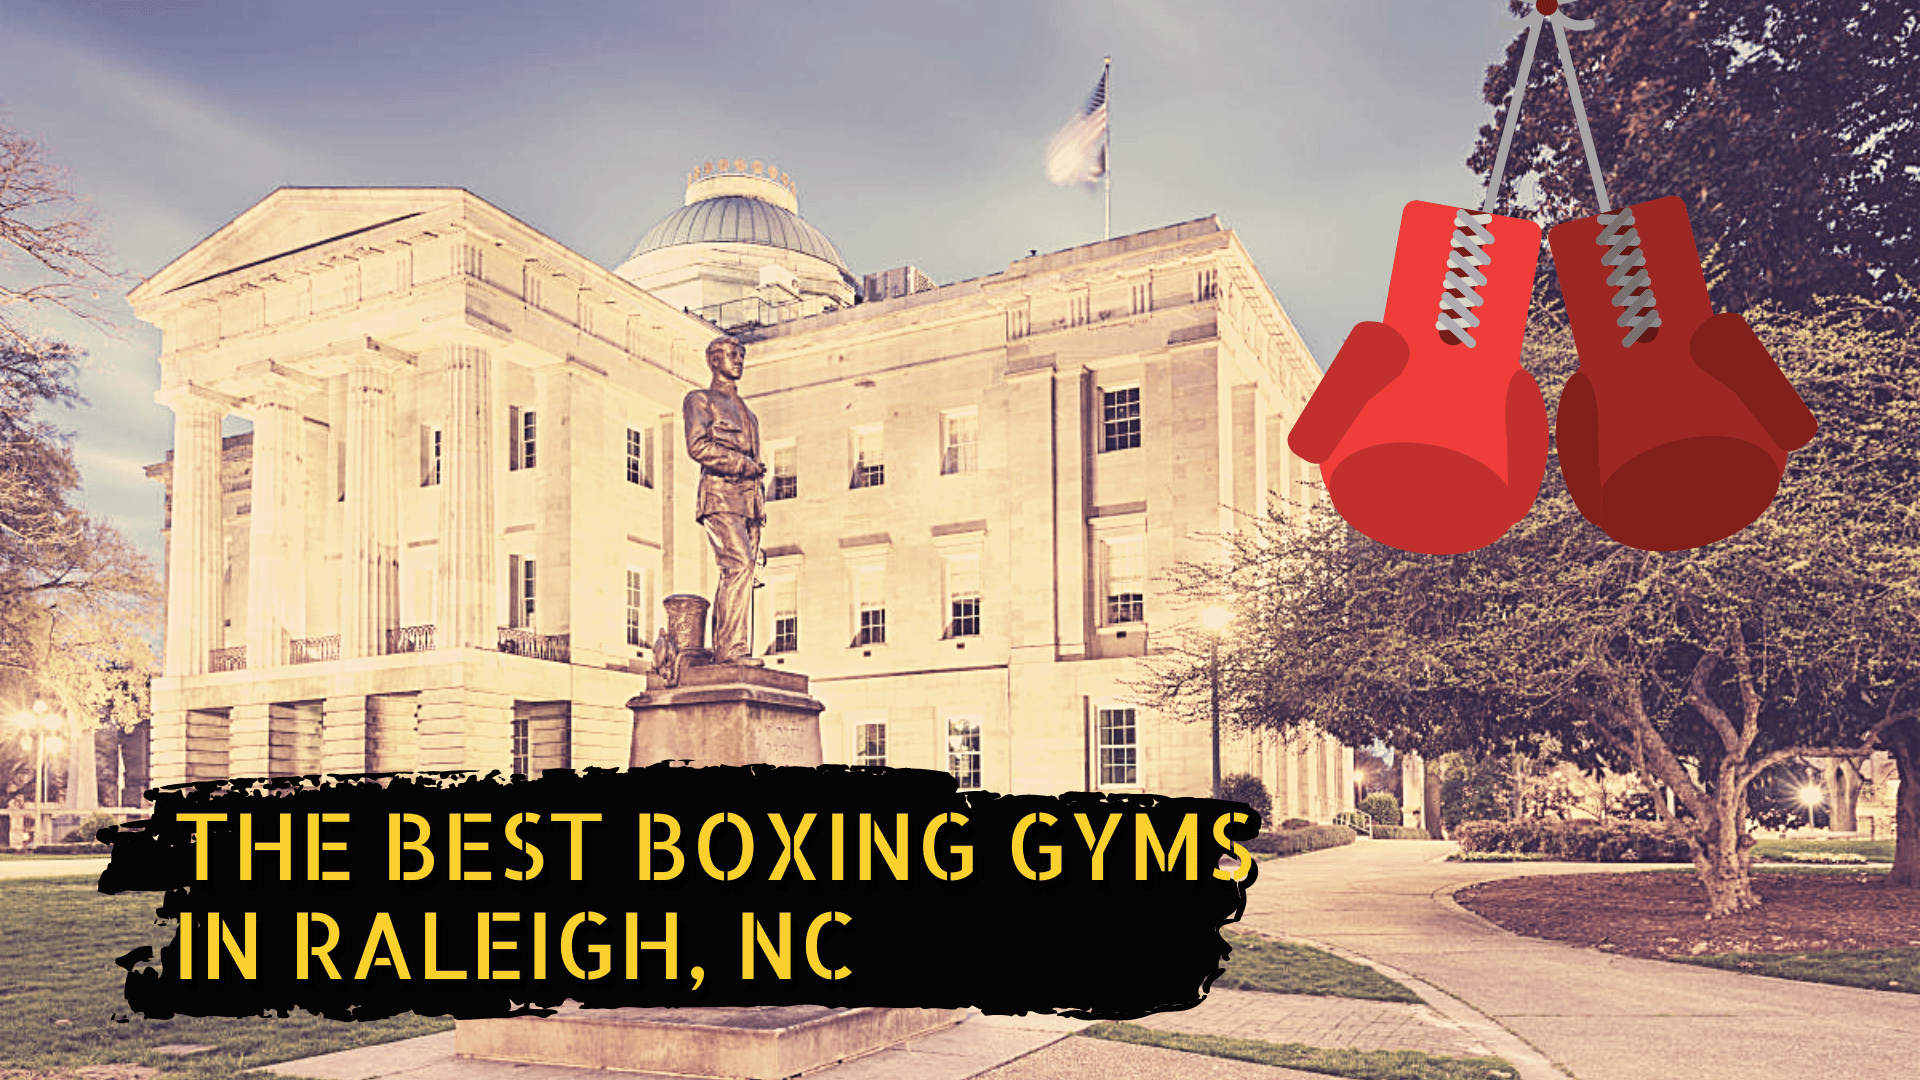 A picture of a landmark in Raleigh with the title "The Best Boxing Gyms in Raleigh, NC"